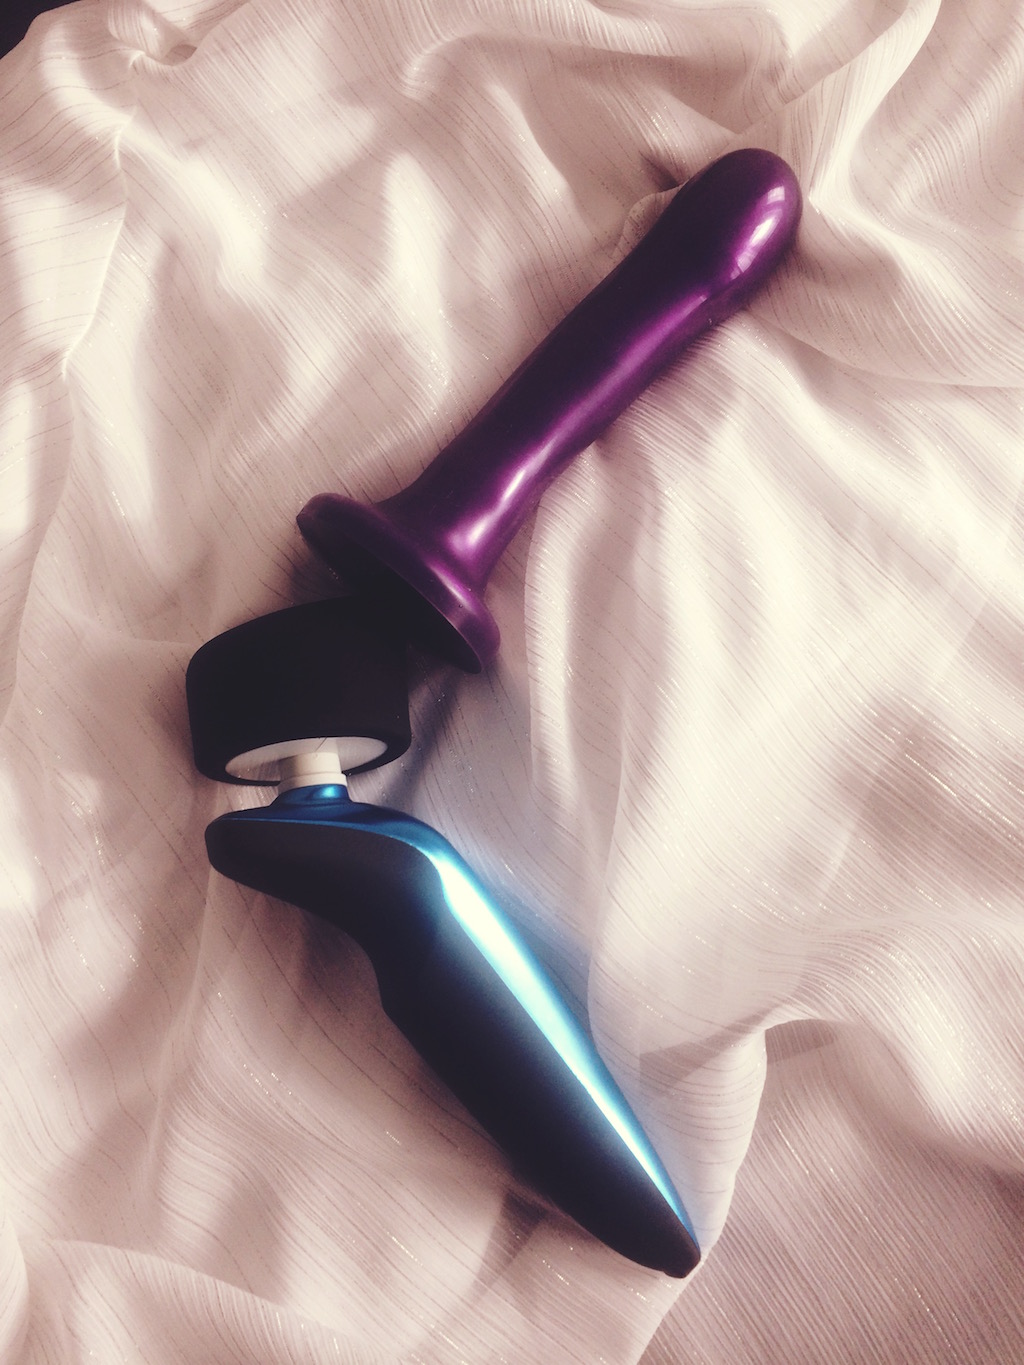 Tantus Rumble blue and black wand vibrator on white background side view showing purple dildo attached to convertible head